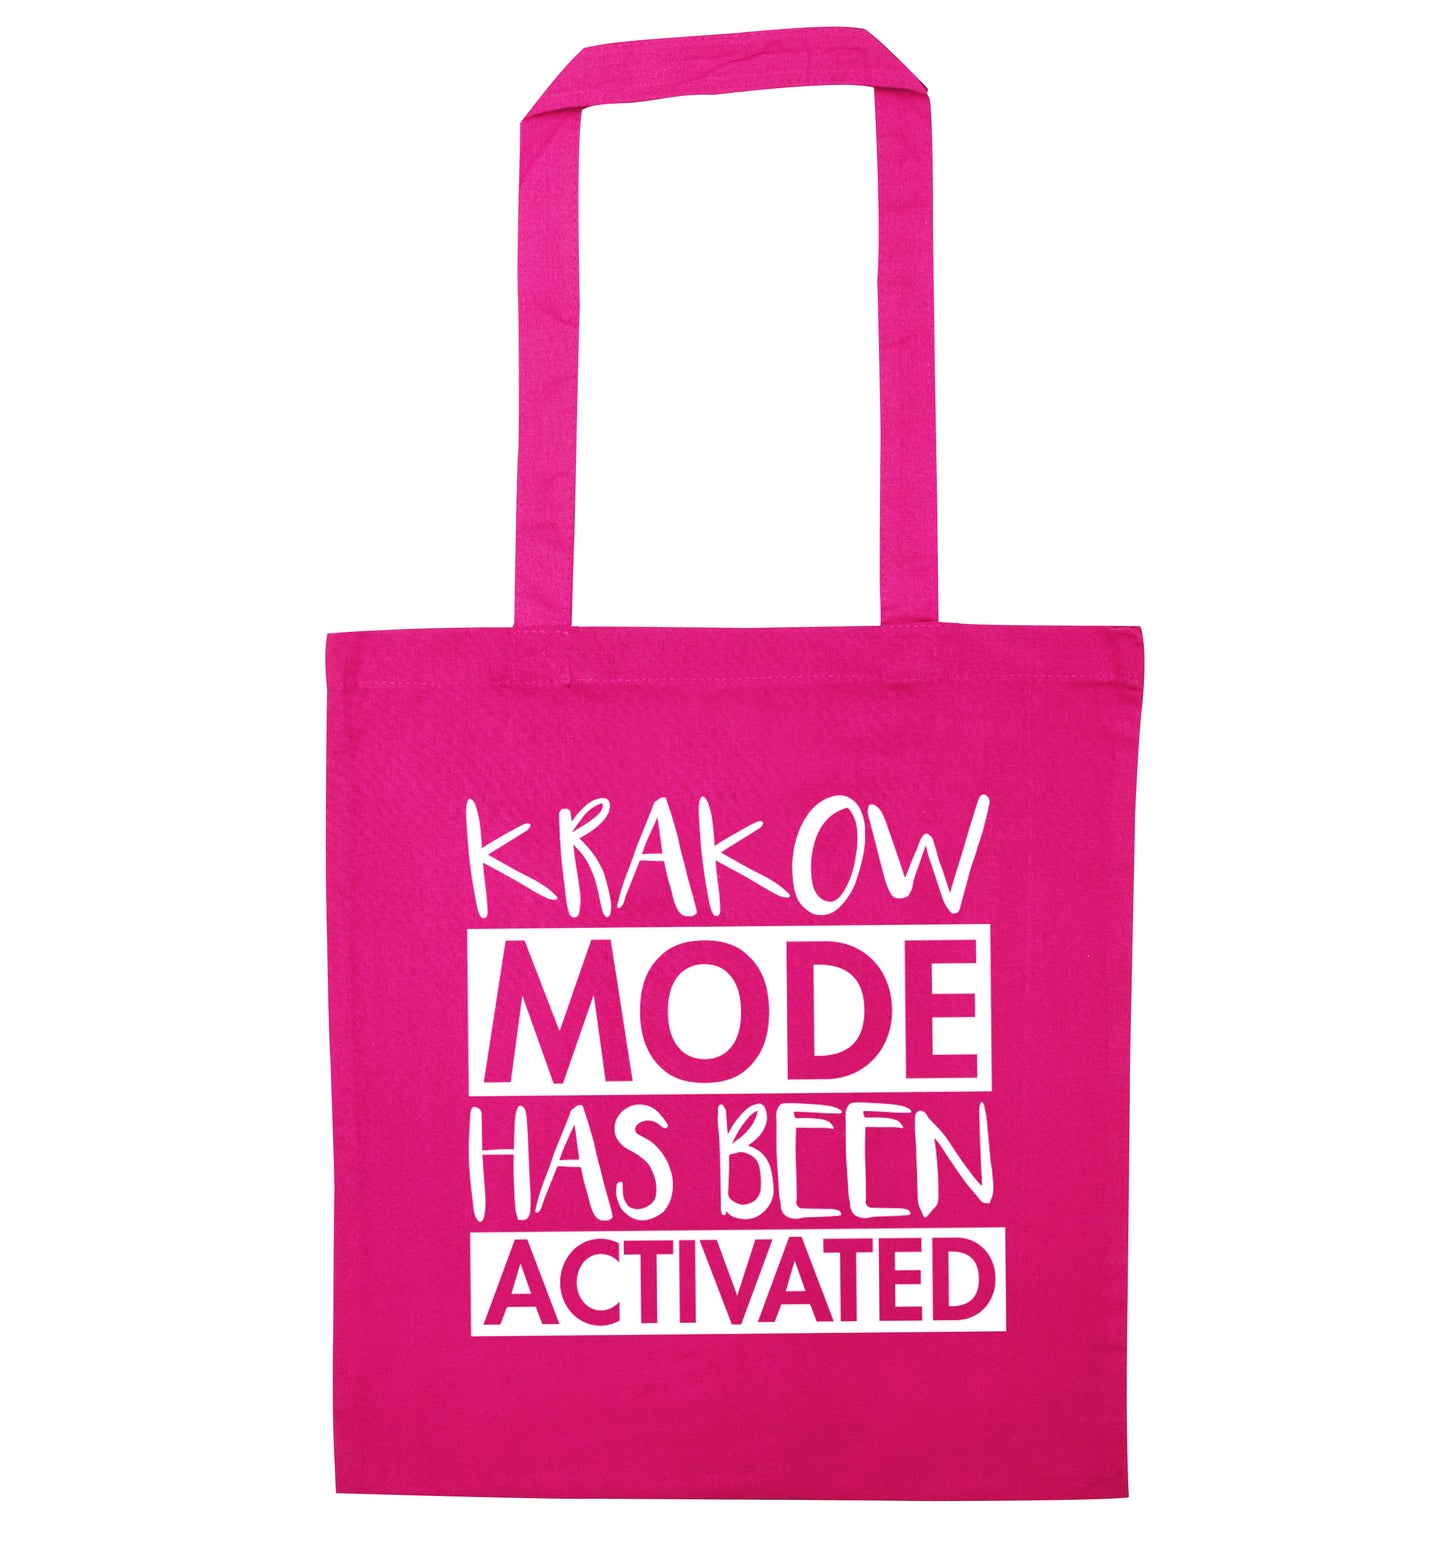 Krakow mode has been activated pink tote bag